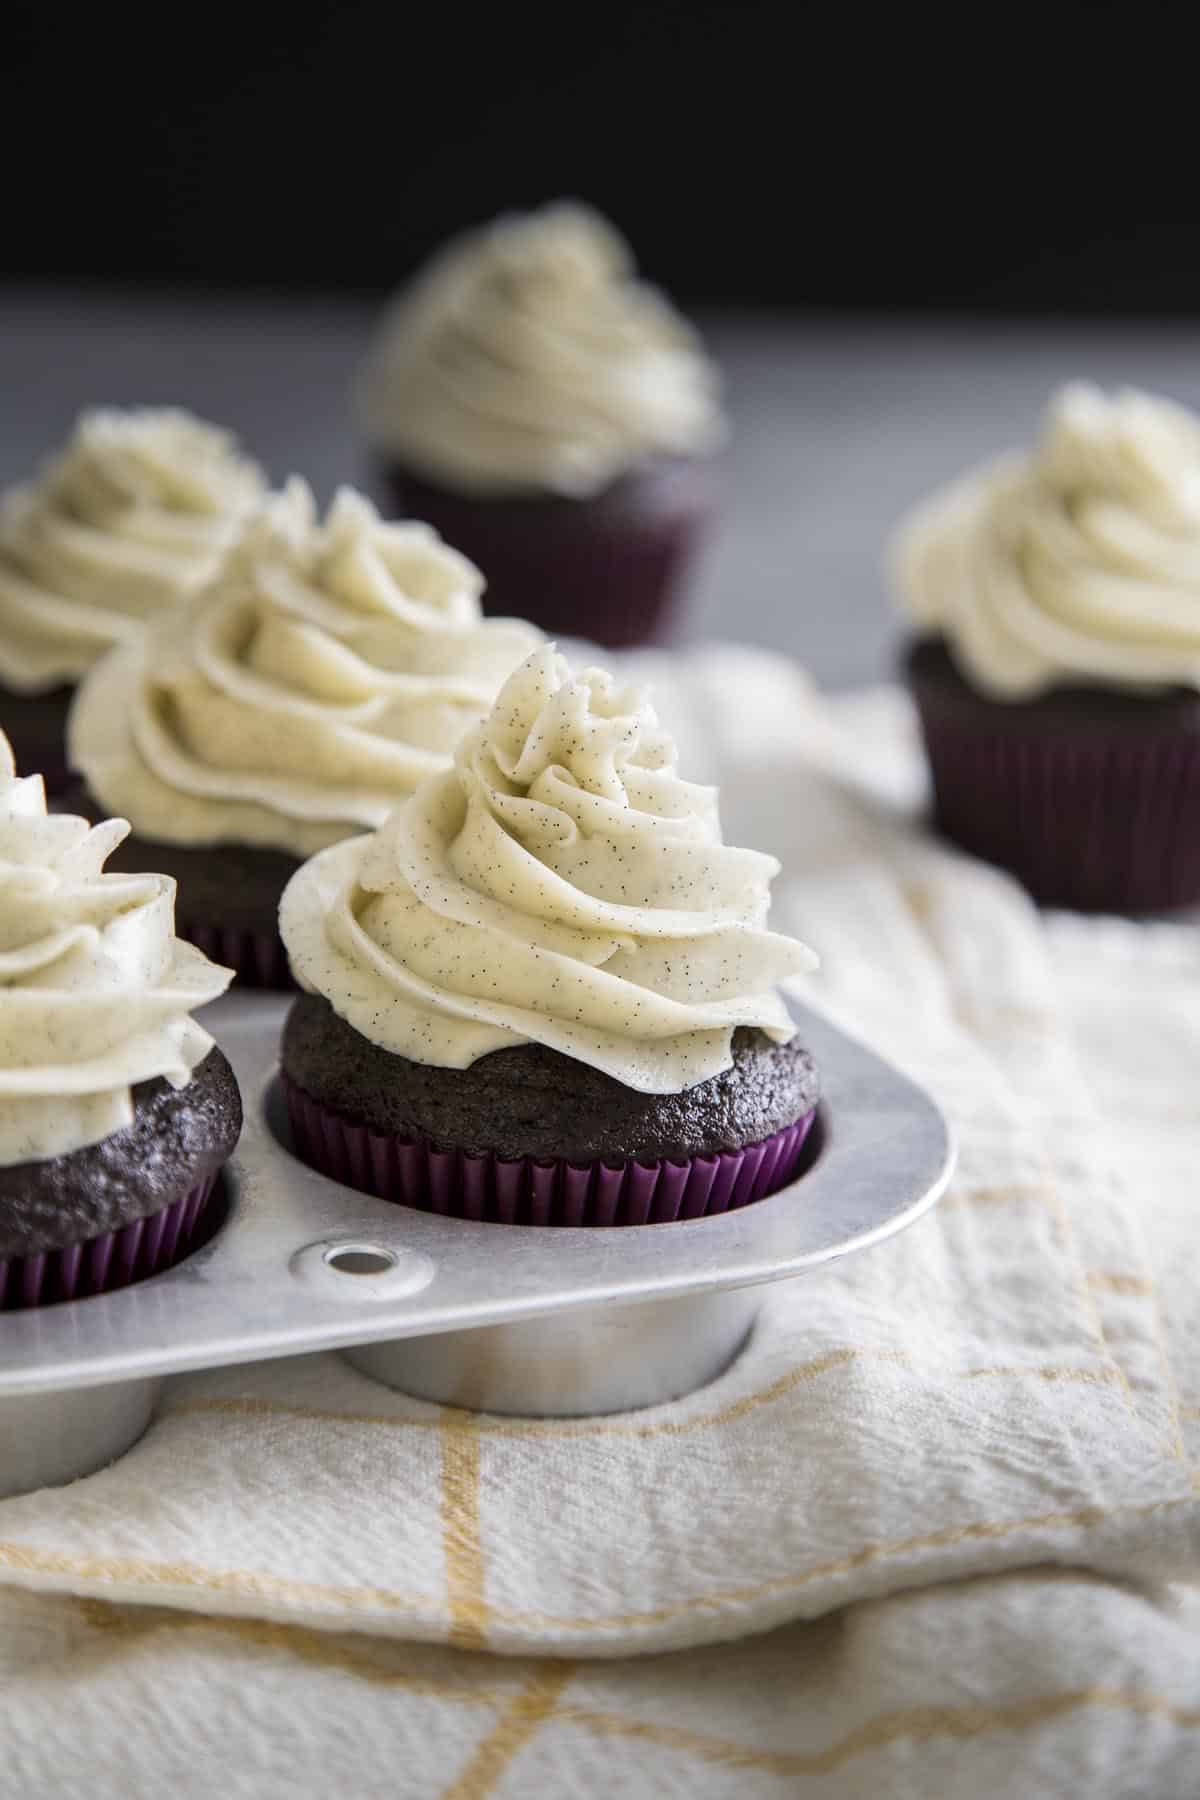 Chocolate Cupcakes with vanilla bean swiss meringue buttercream in a muffin pan